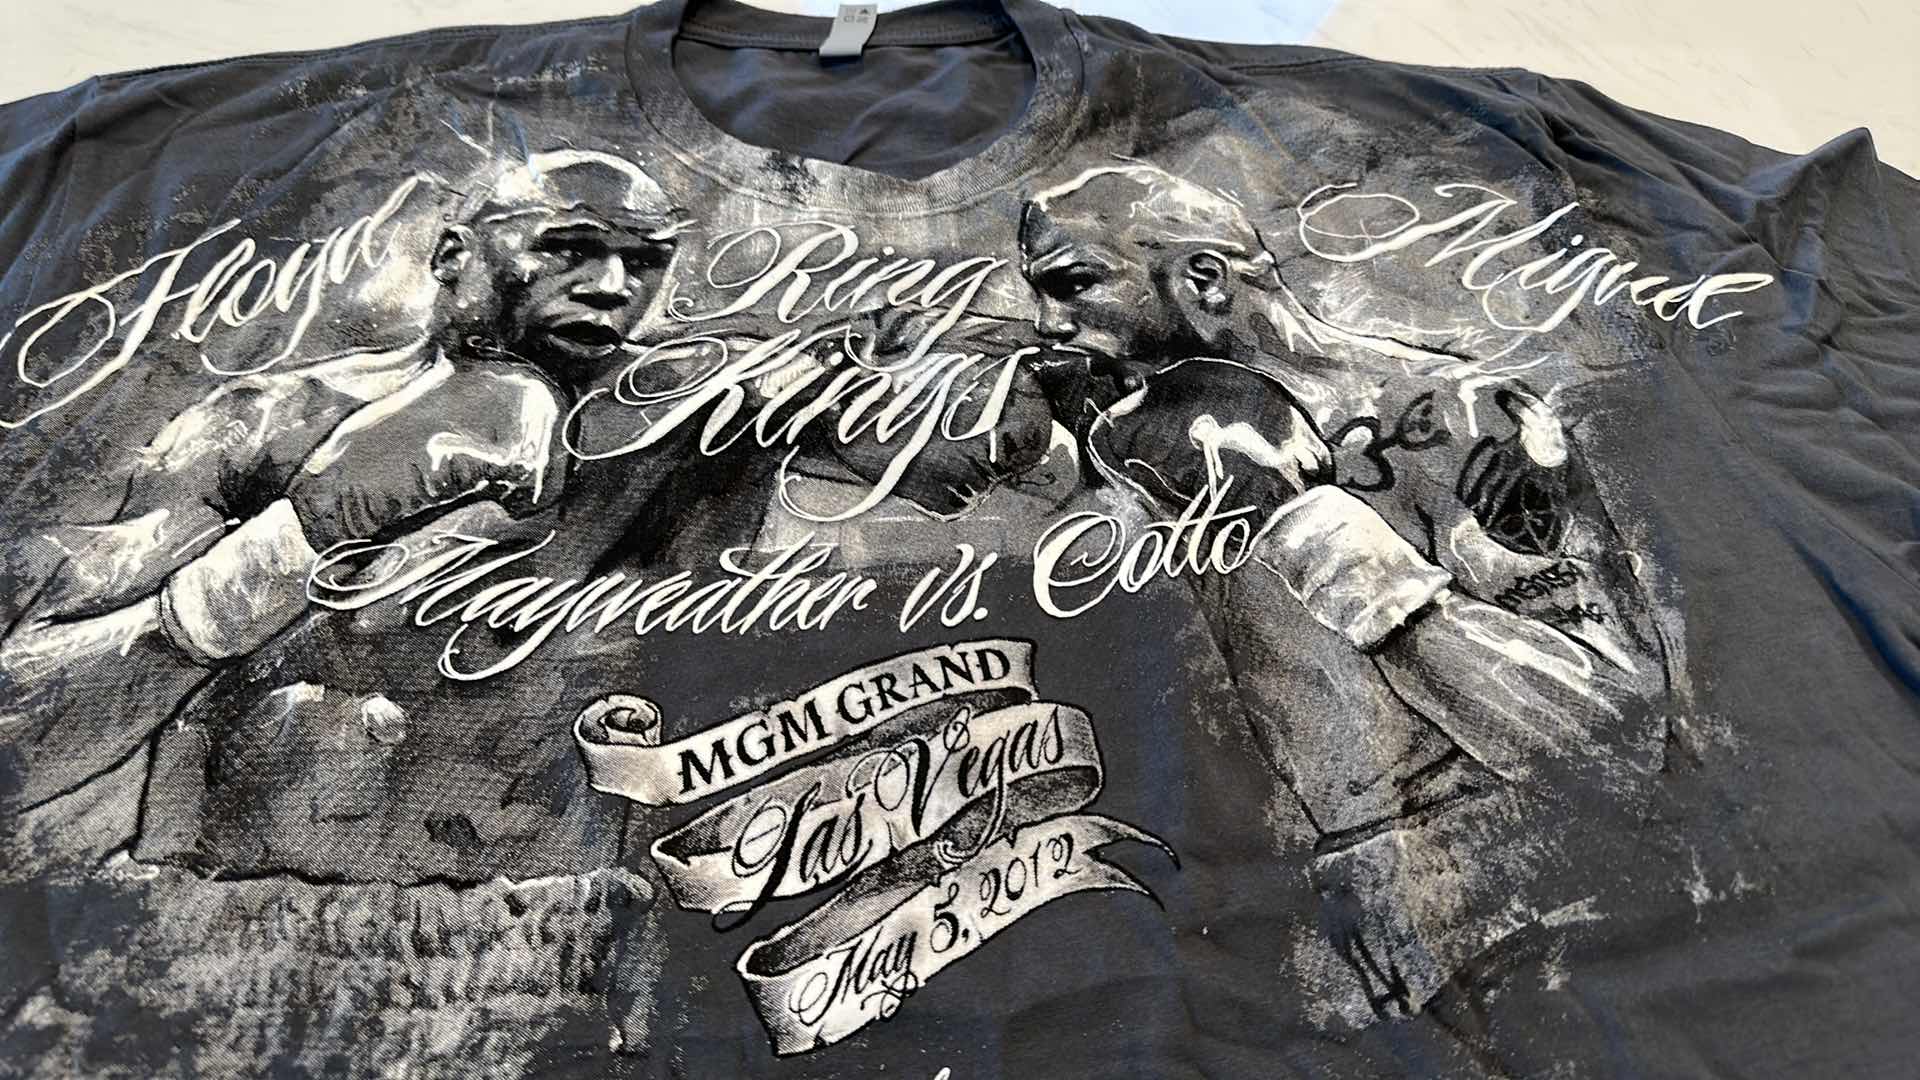 Photo 2 of FLOYD MAYWEATHER VS MIGUEL COTTO SHIRT 2XL